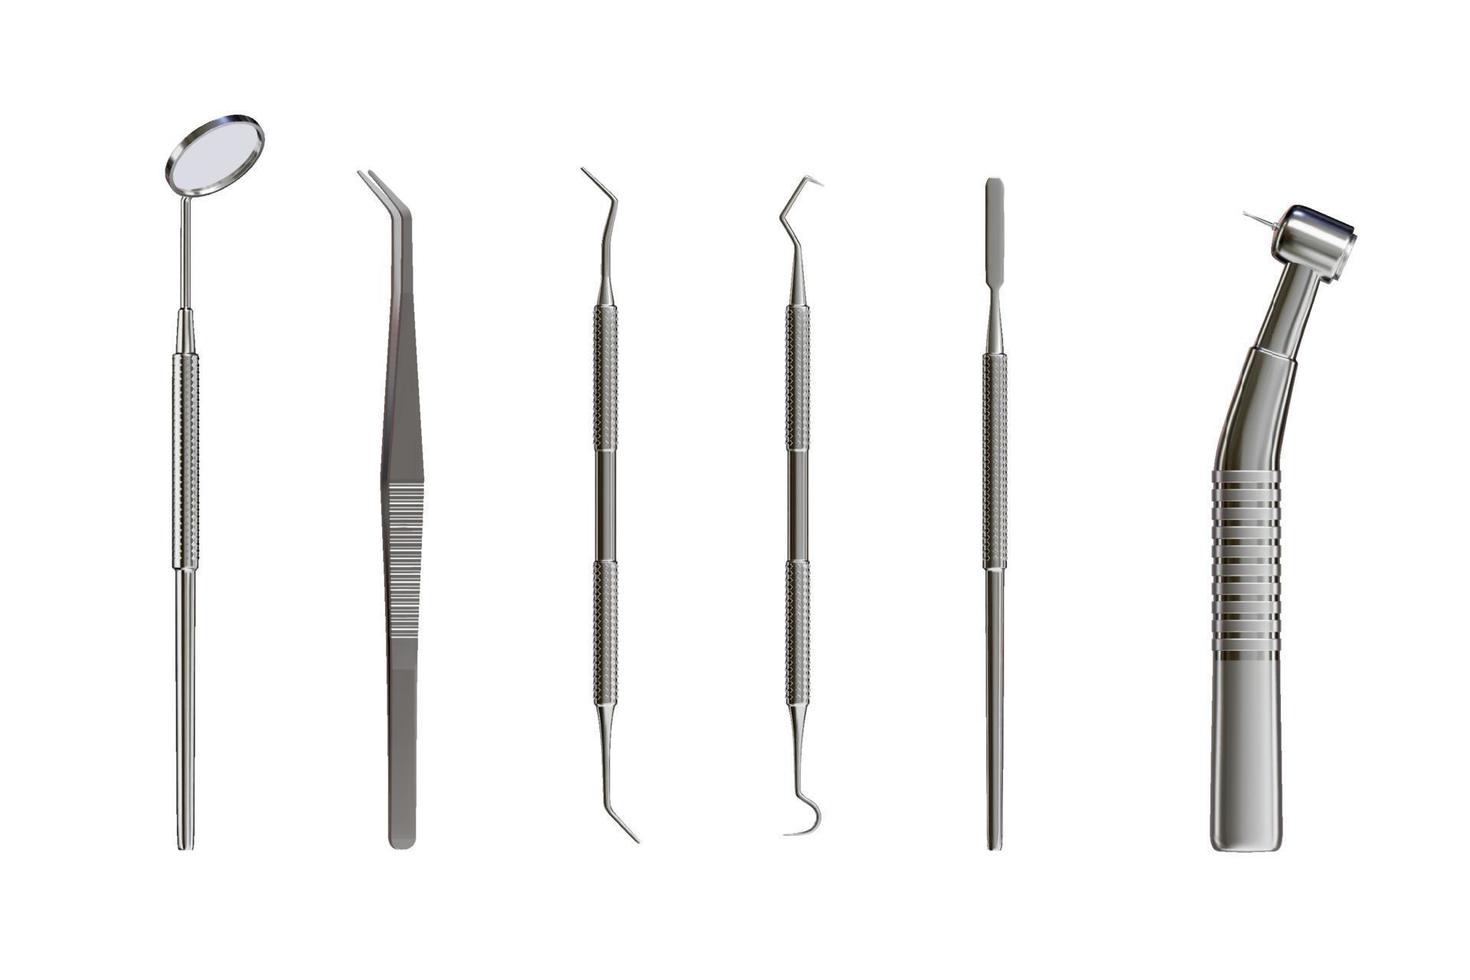 3d realistic professional dental tools set for dentistry inspection. Teeth care, health concept. Basic metal medical equipment, instrument top view. Vector illustration isolated on white background